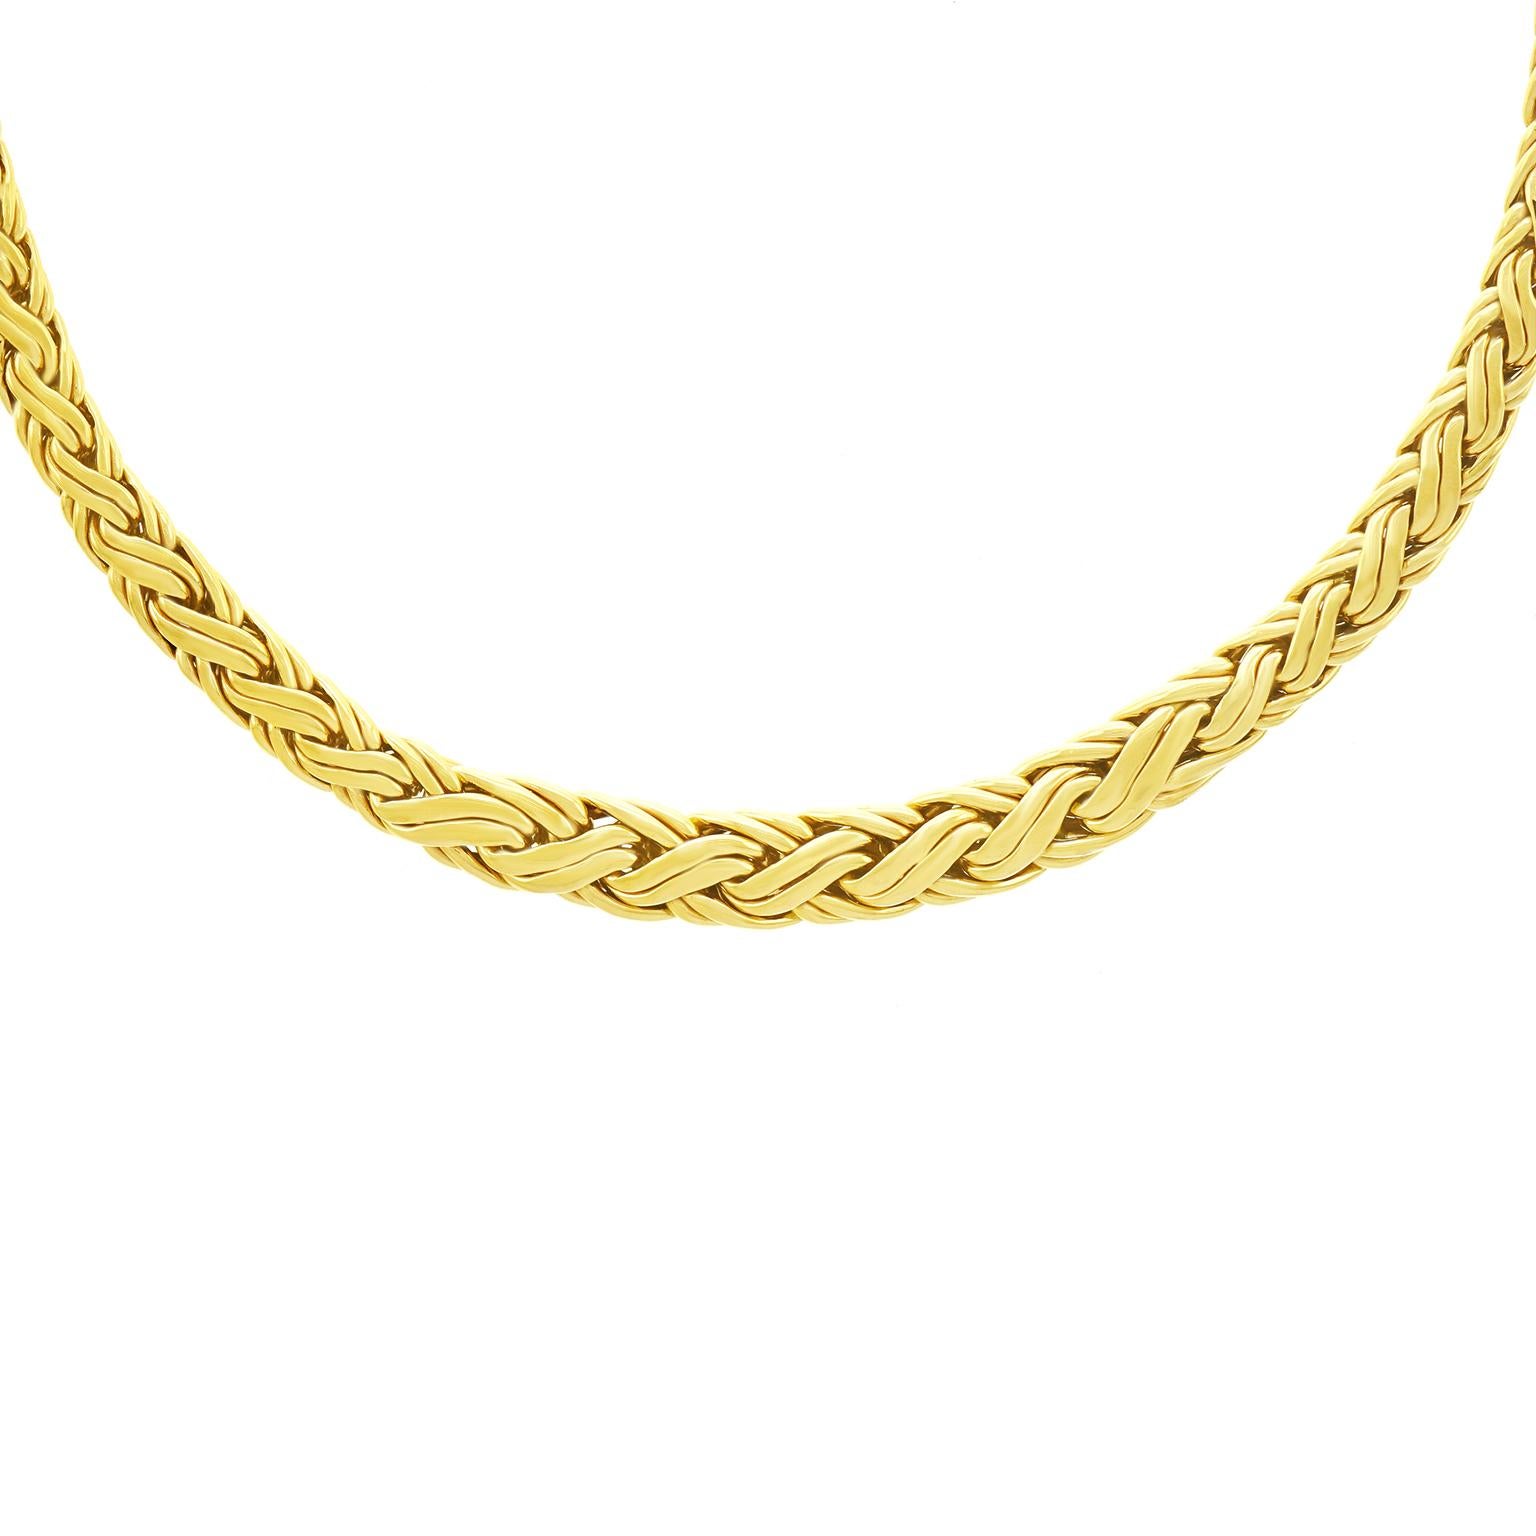 Tiffany & Co. Gold Russian Braid Necklace 1